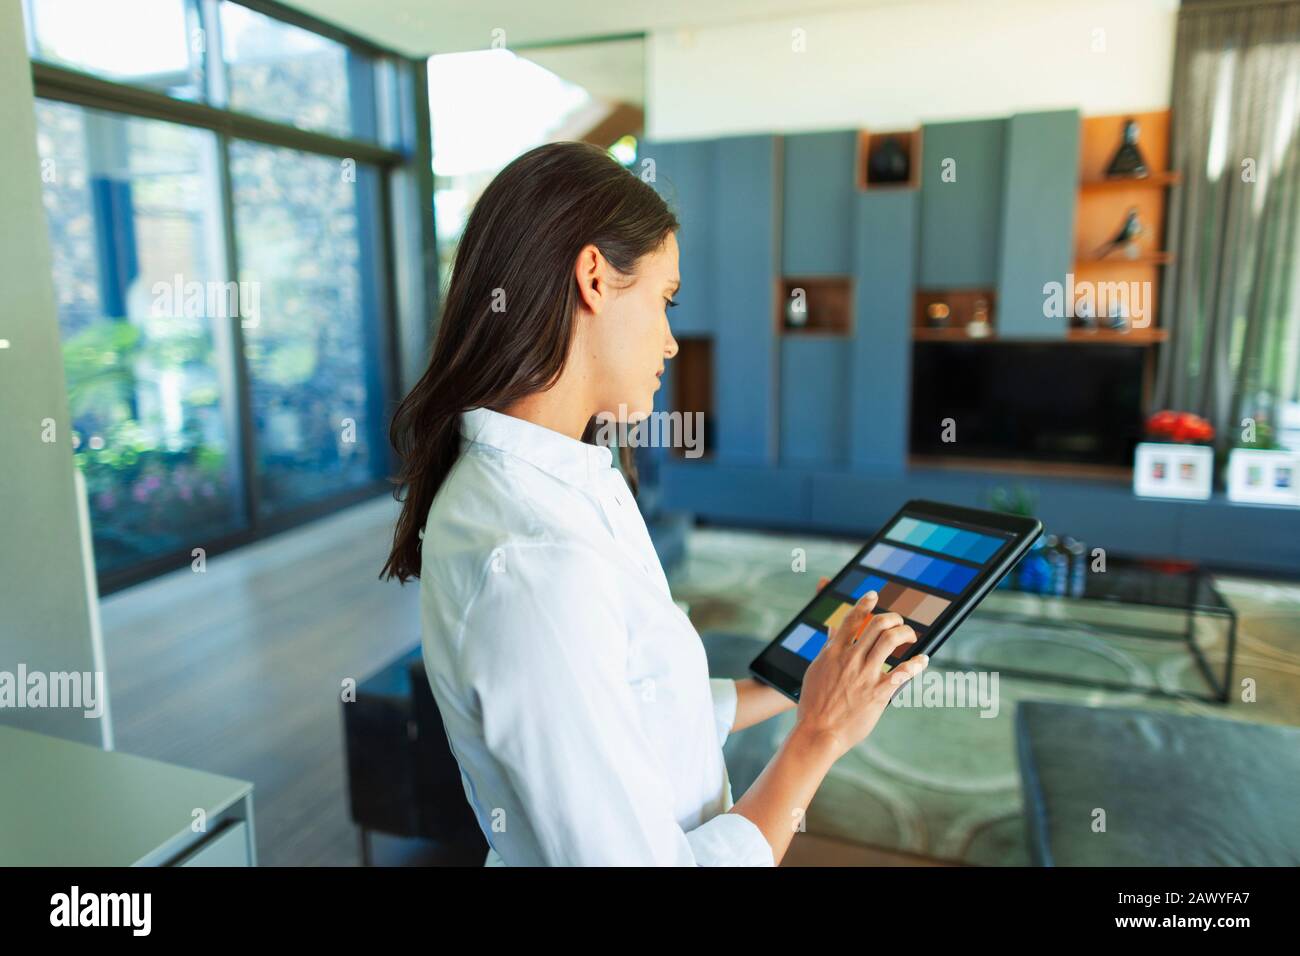 Female interior designer looking at digital color swatches on digital tablet Stock Photo